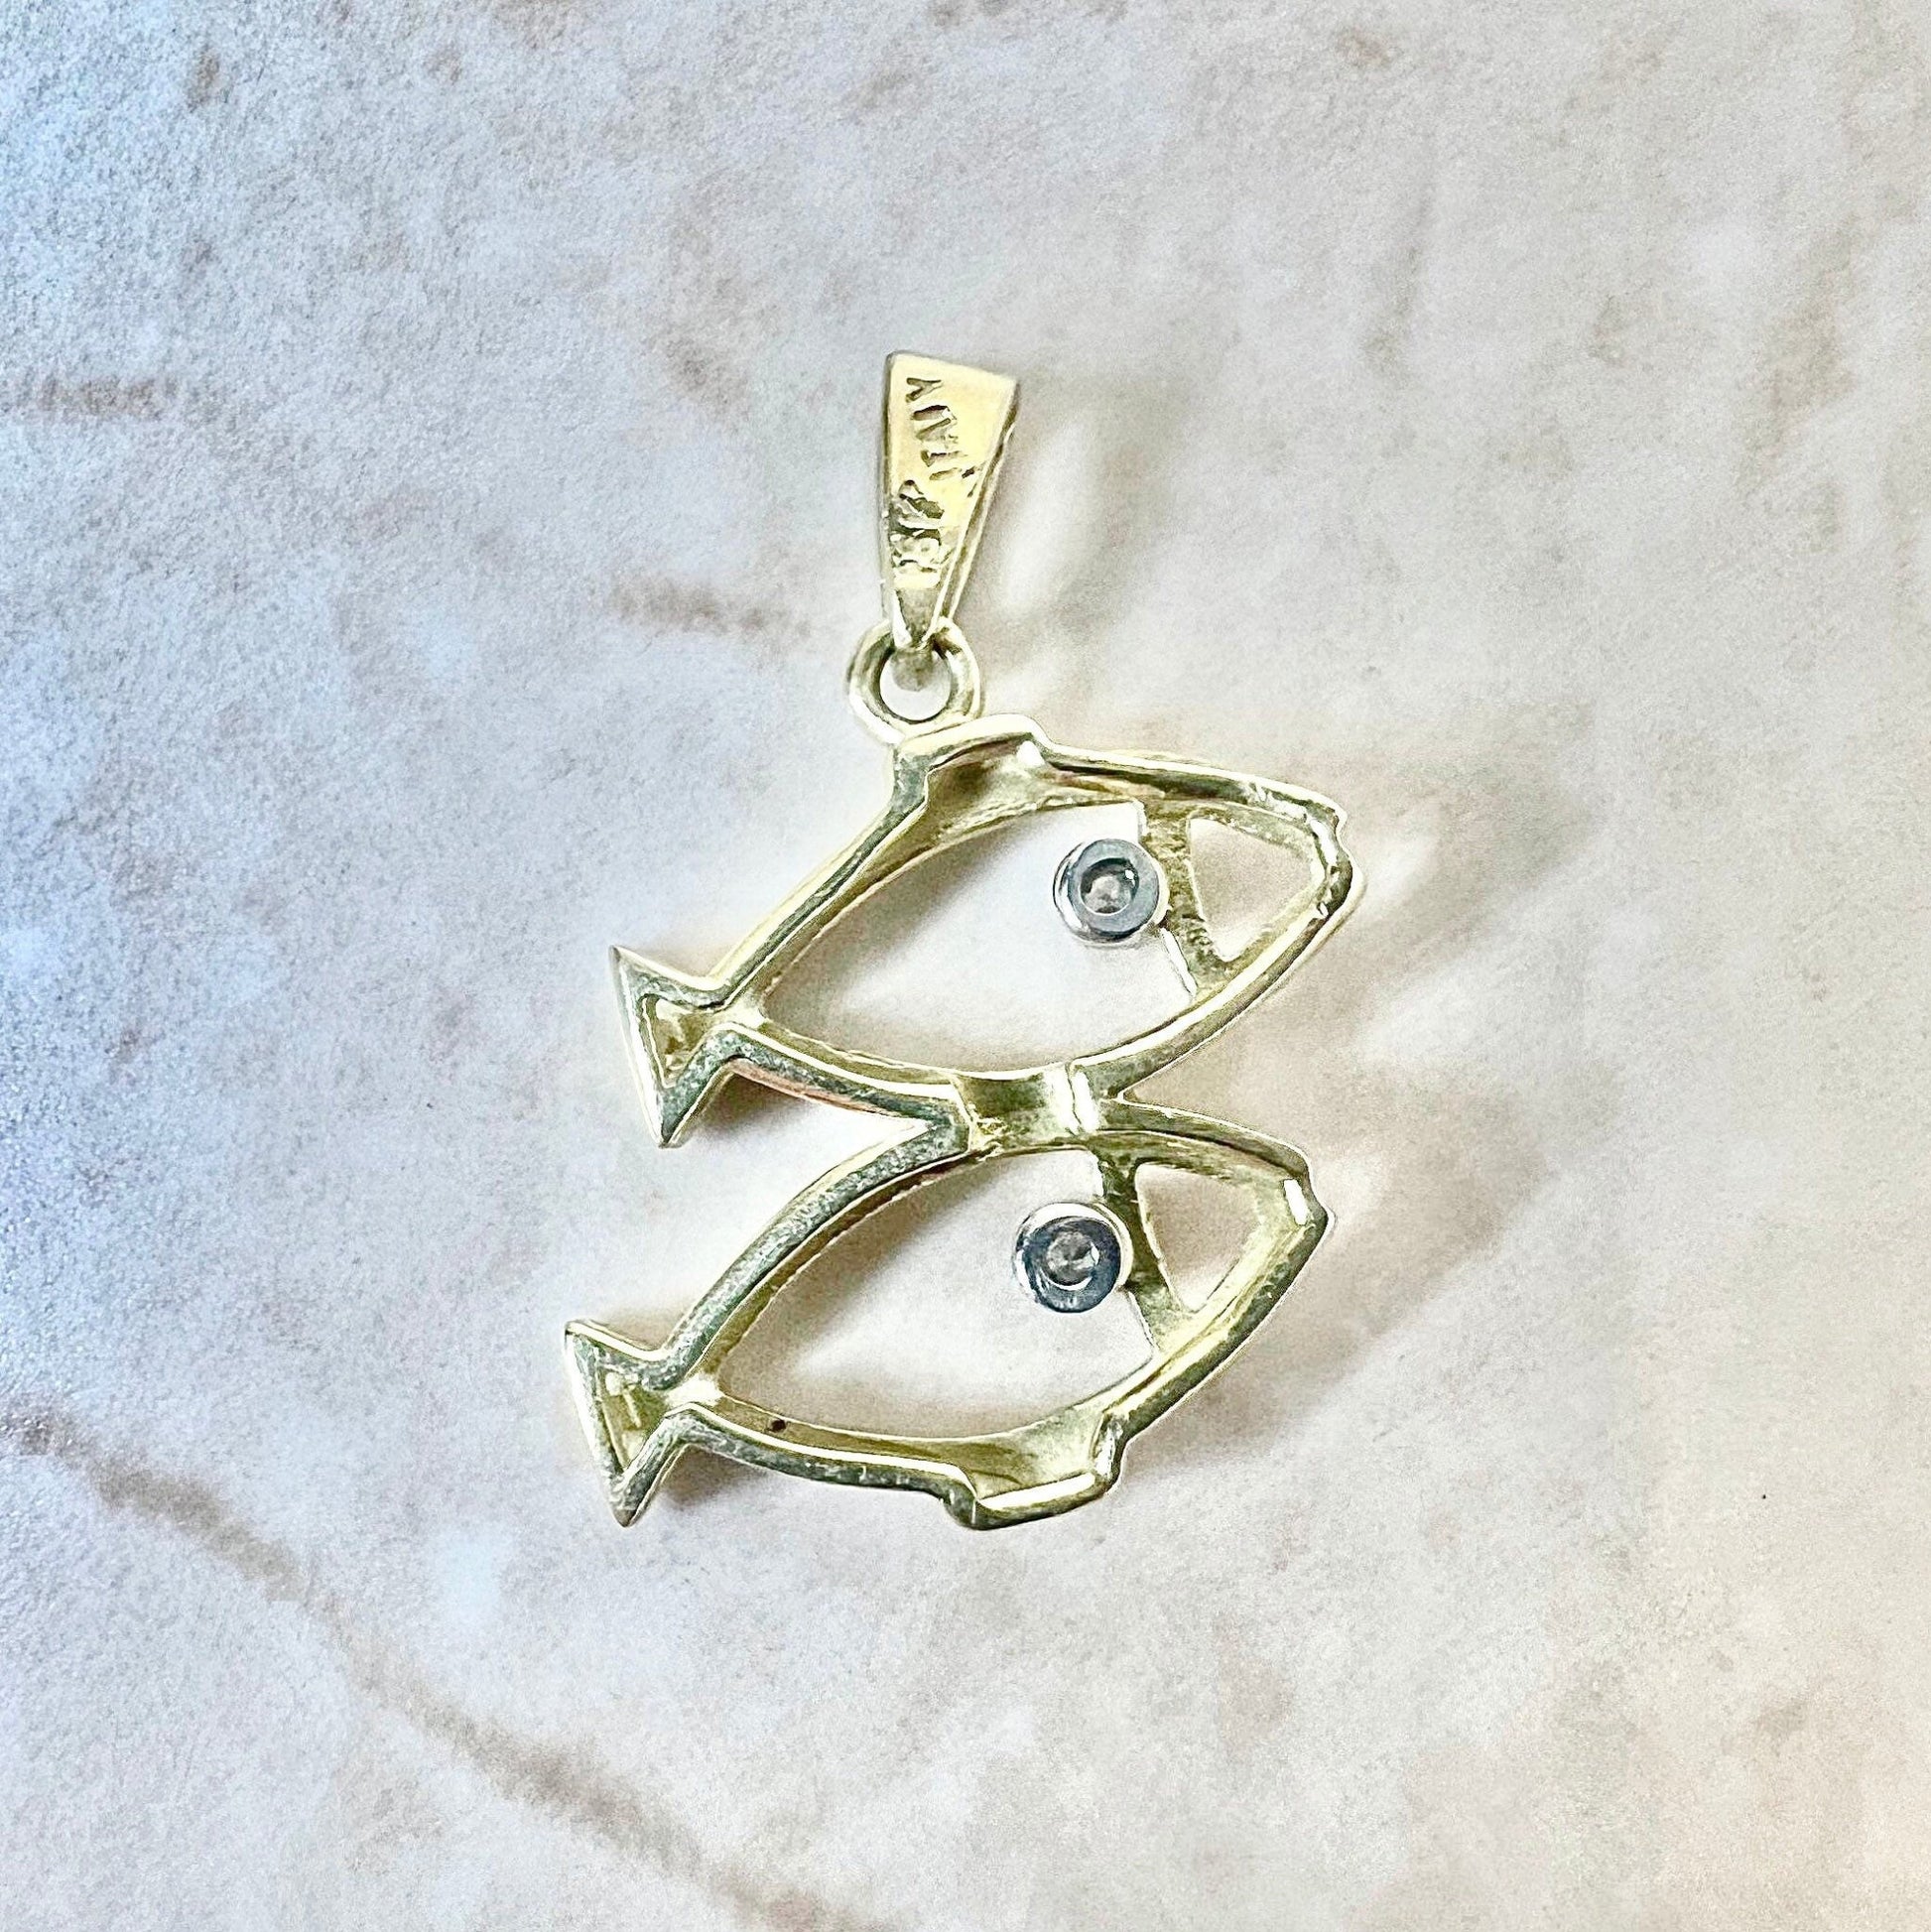 Vintage Italian 18K Yellow Gold Diamond Fish Pendant Necklace - Diamond Pendant - Pisces Pendant - Diamond Necklace - Birthday Gift For Her